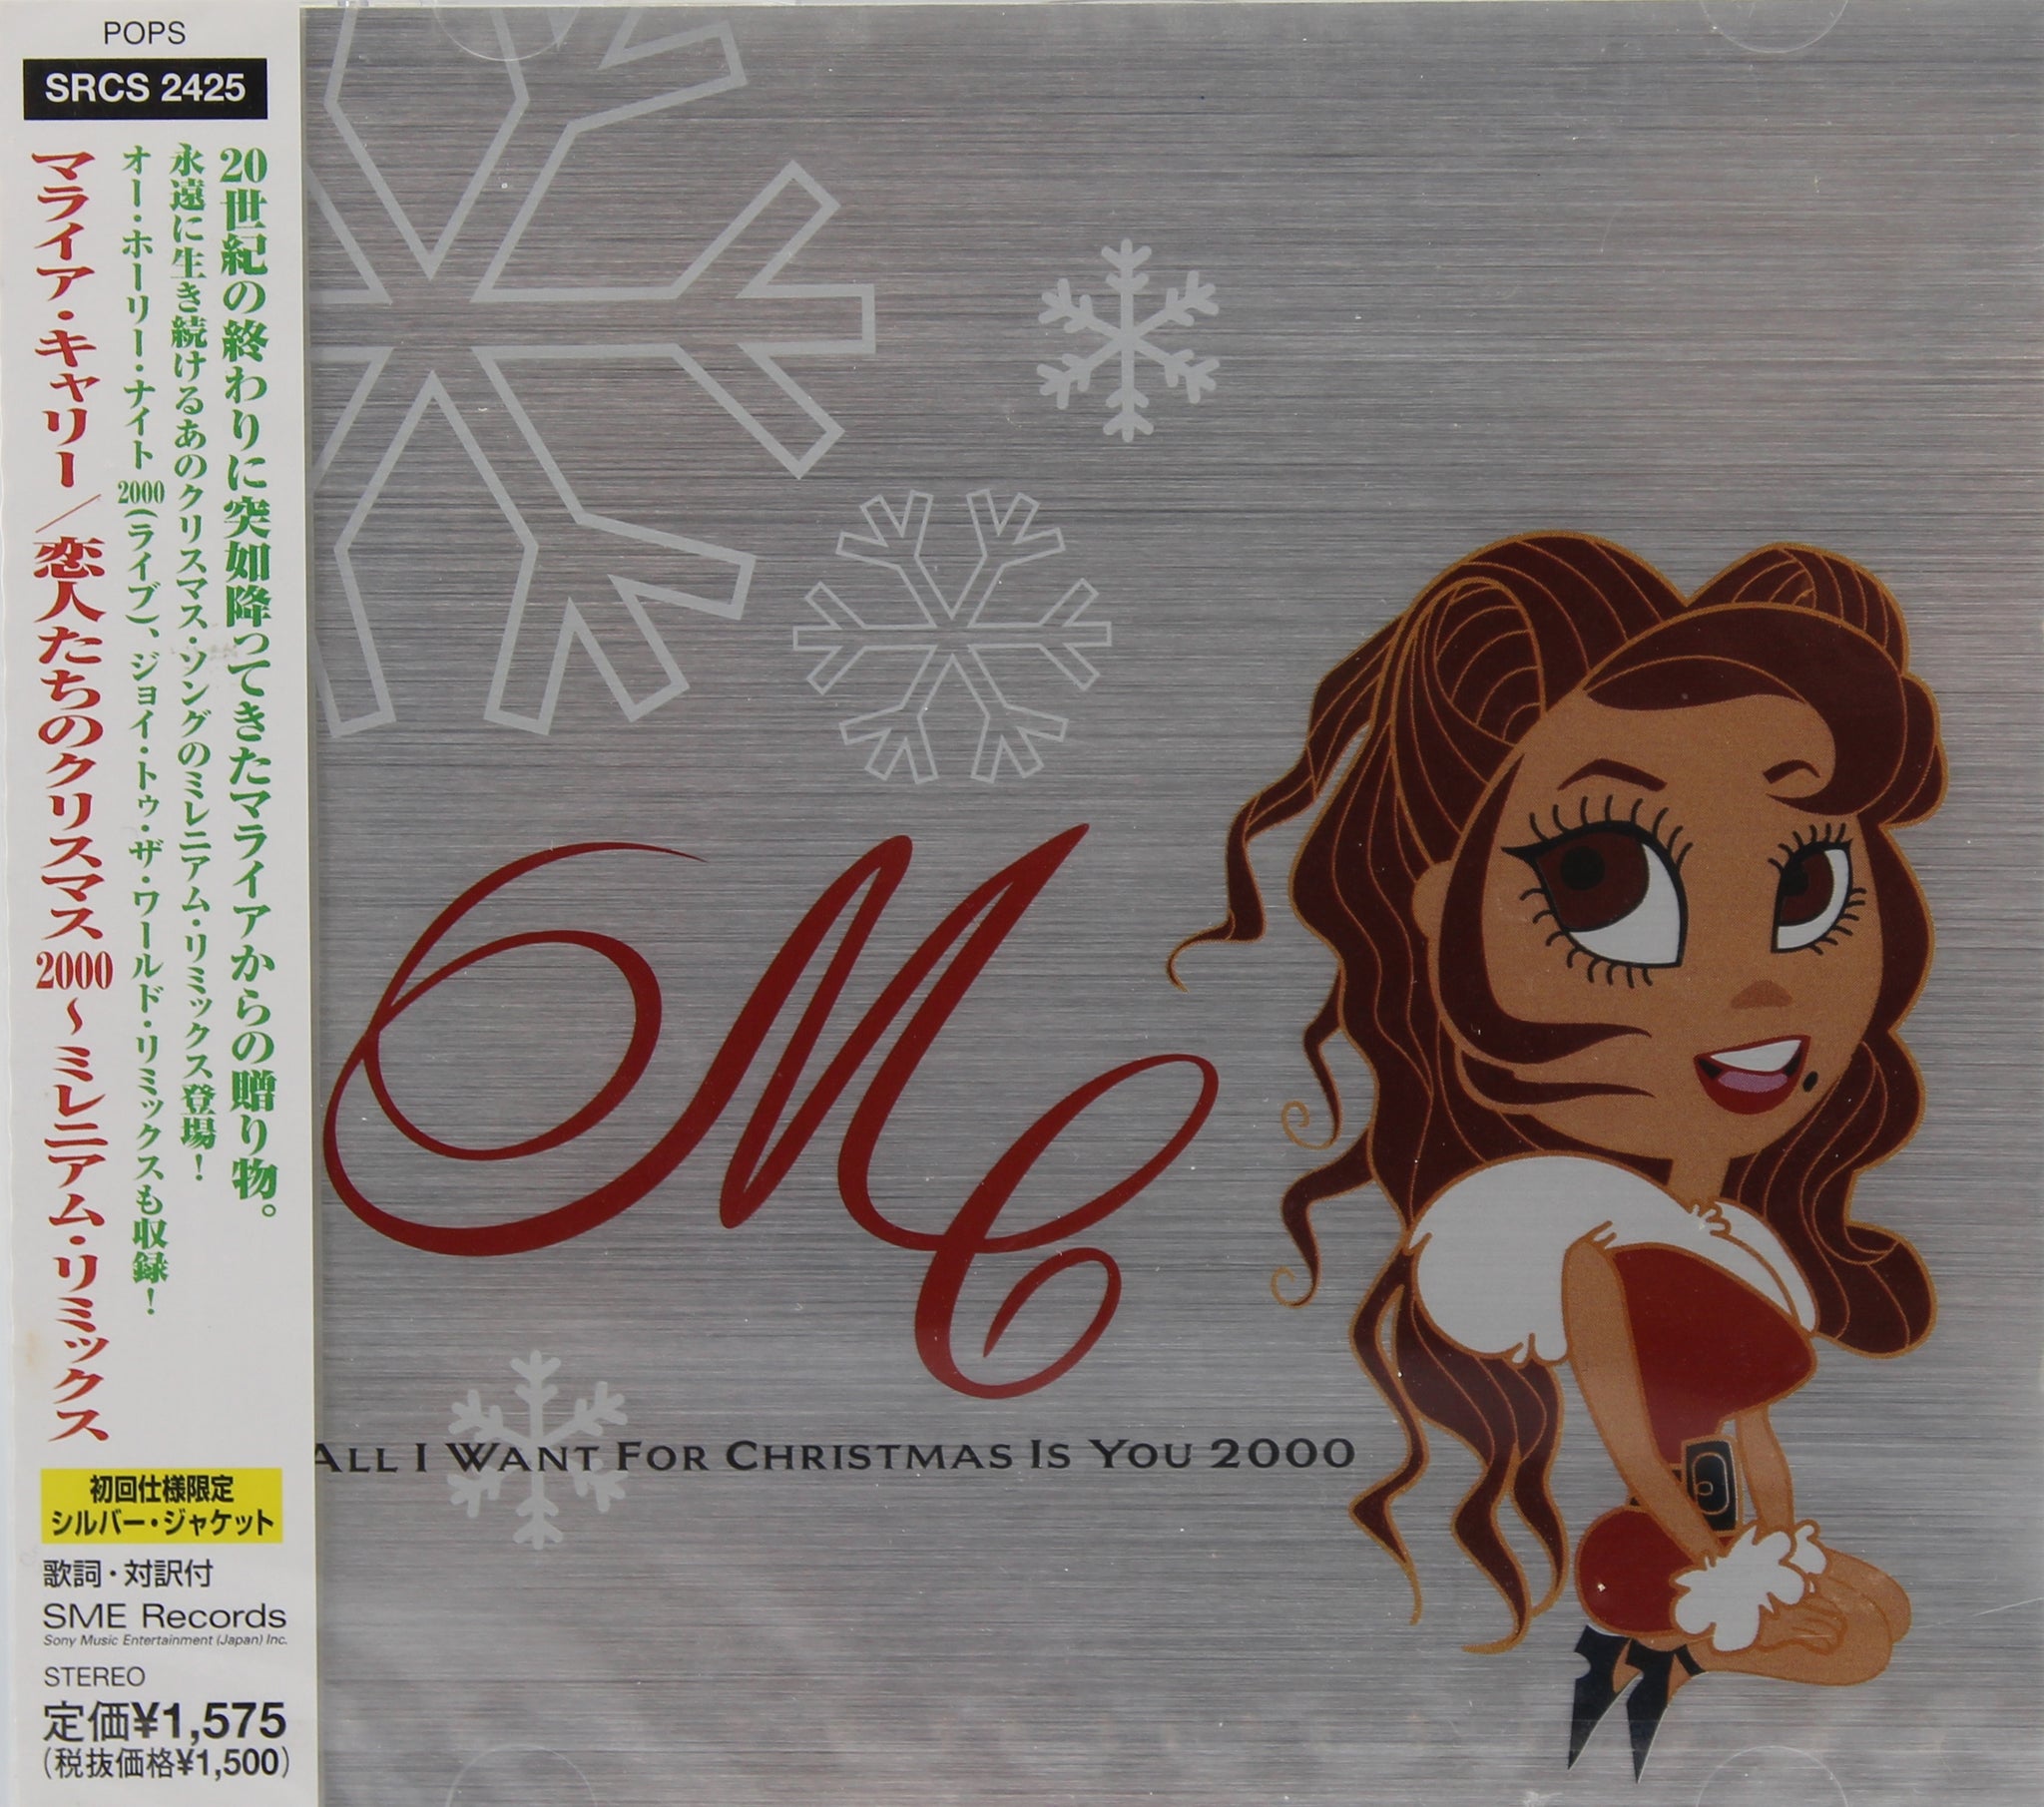 Mariah Carey ‎– All I Want For Christmas Is You 2000, CD, Maxi